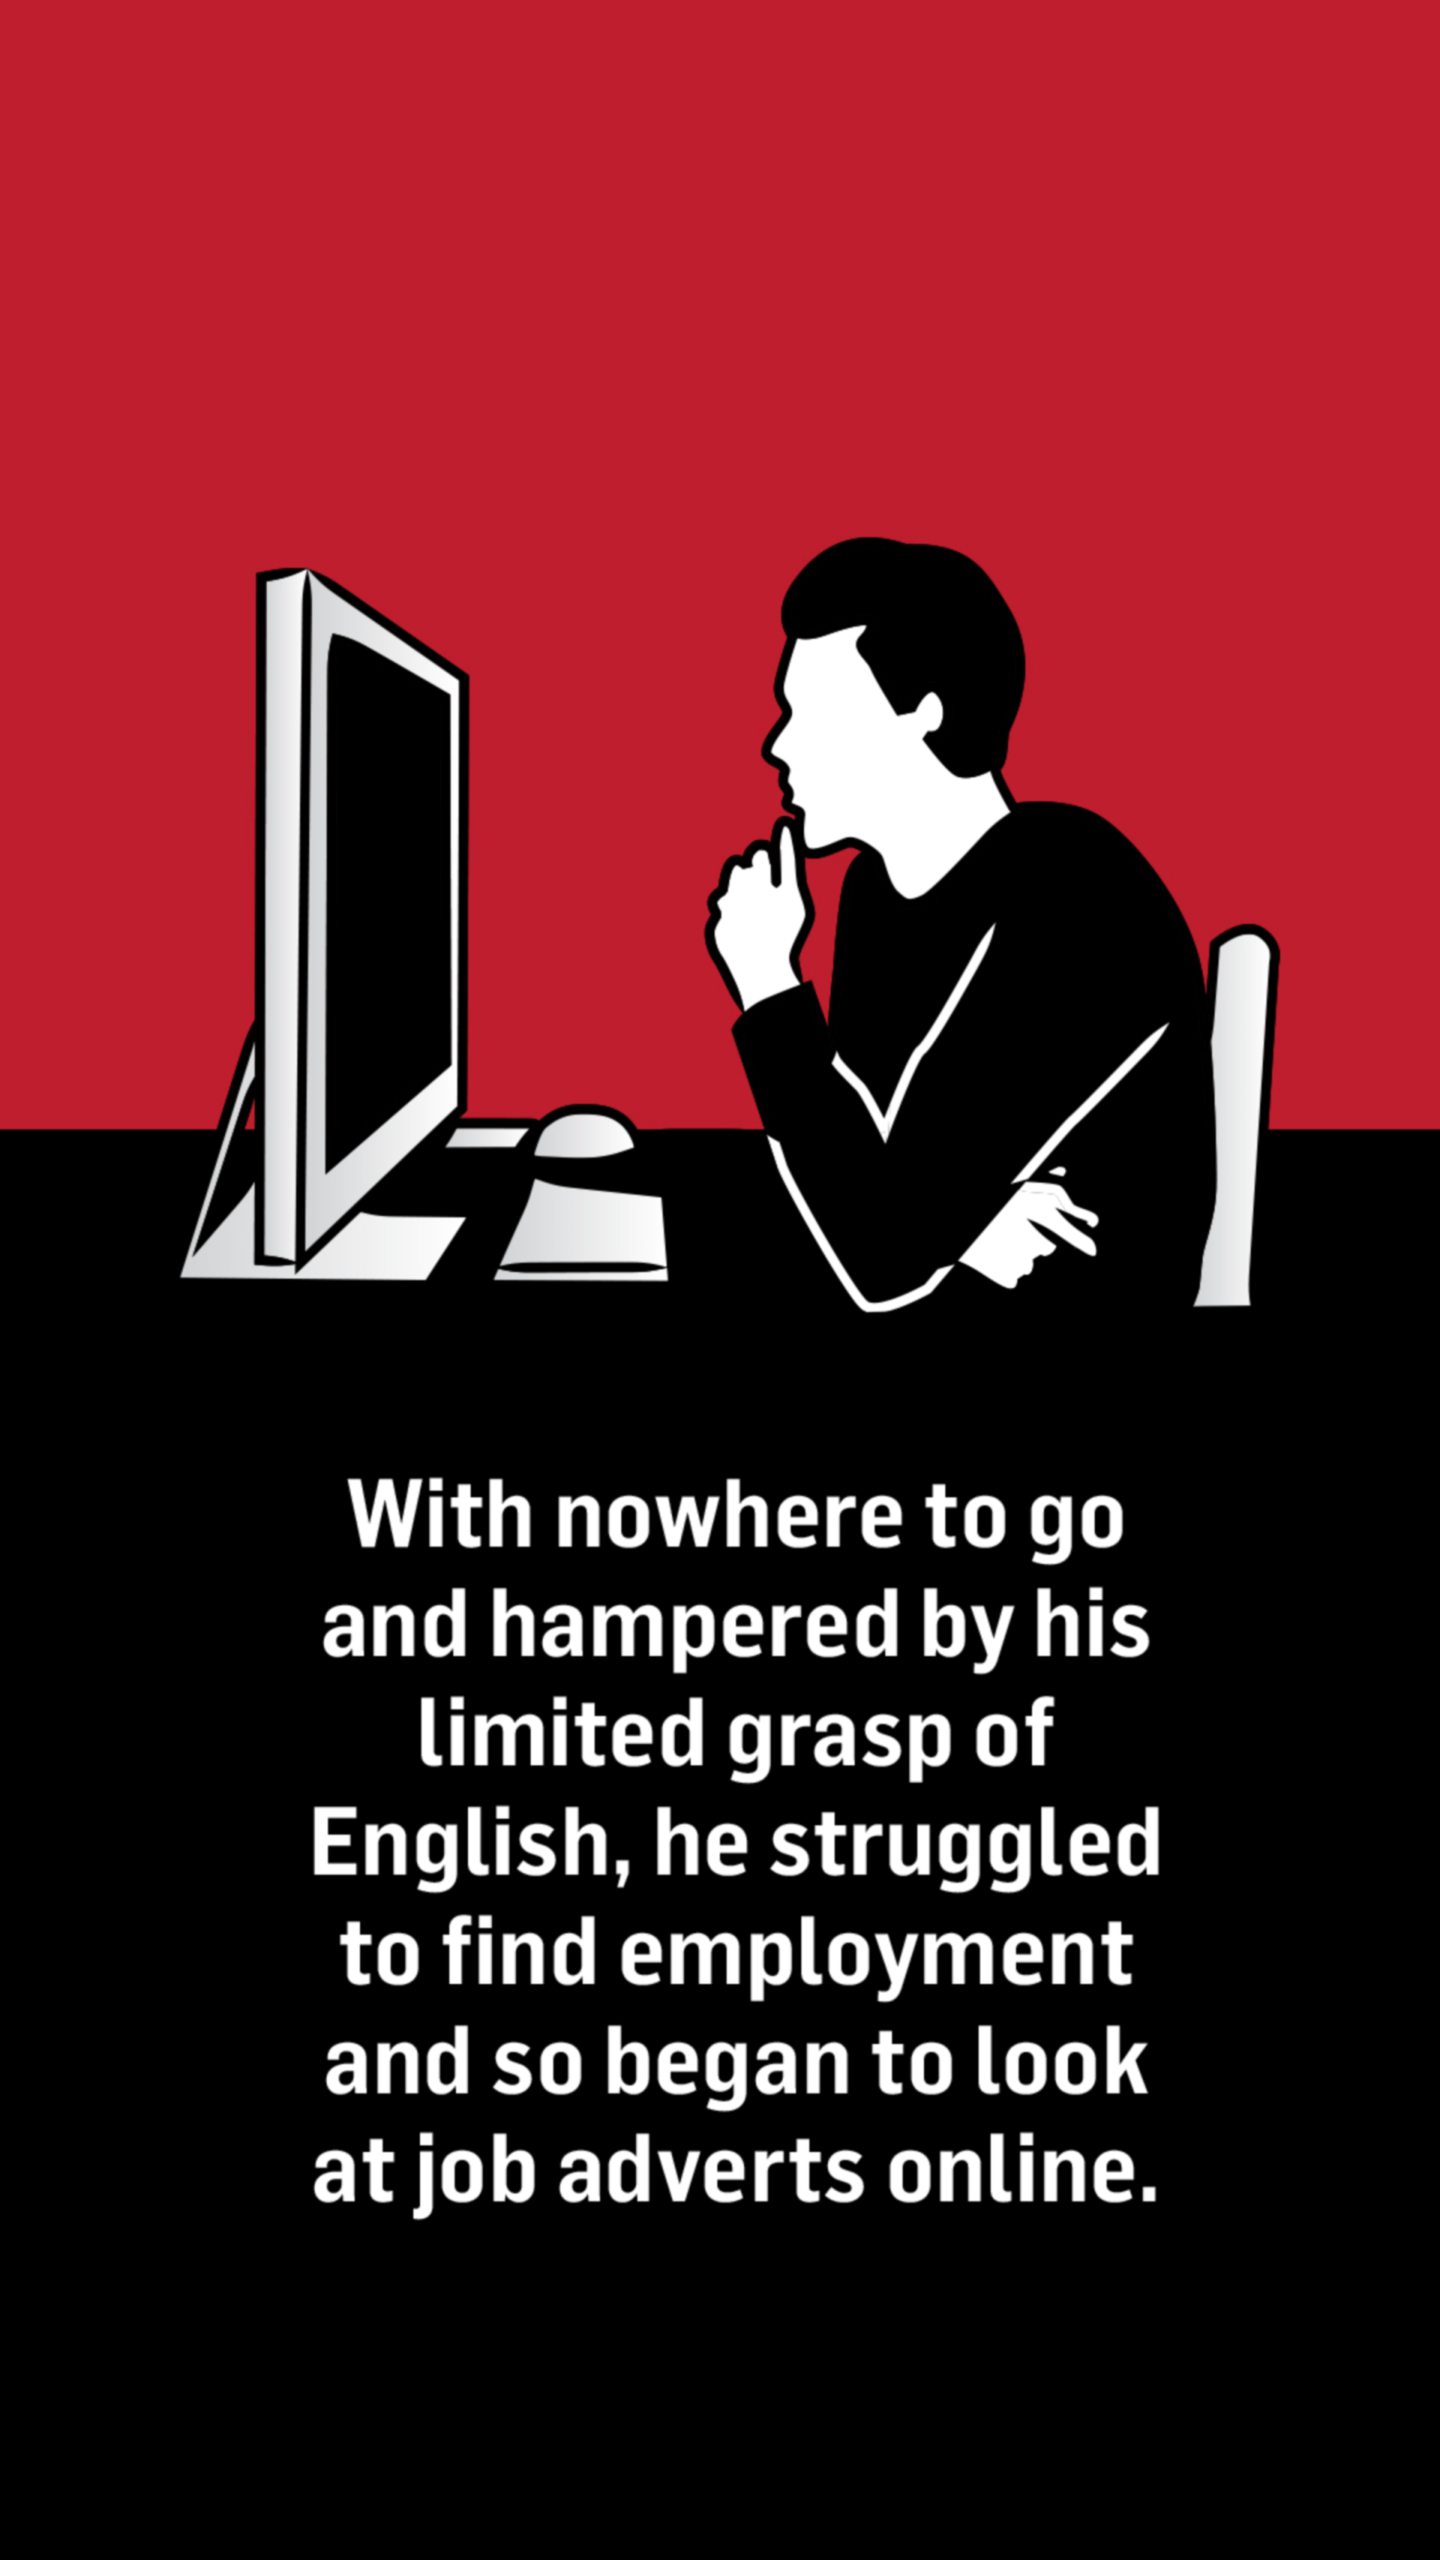 An illustration of a man sitting at his computer. Words below the image read: With nowhere to go and hampered by his limited grasp of English, he struggled to find employment and so began to look at job adverts online.